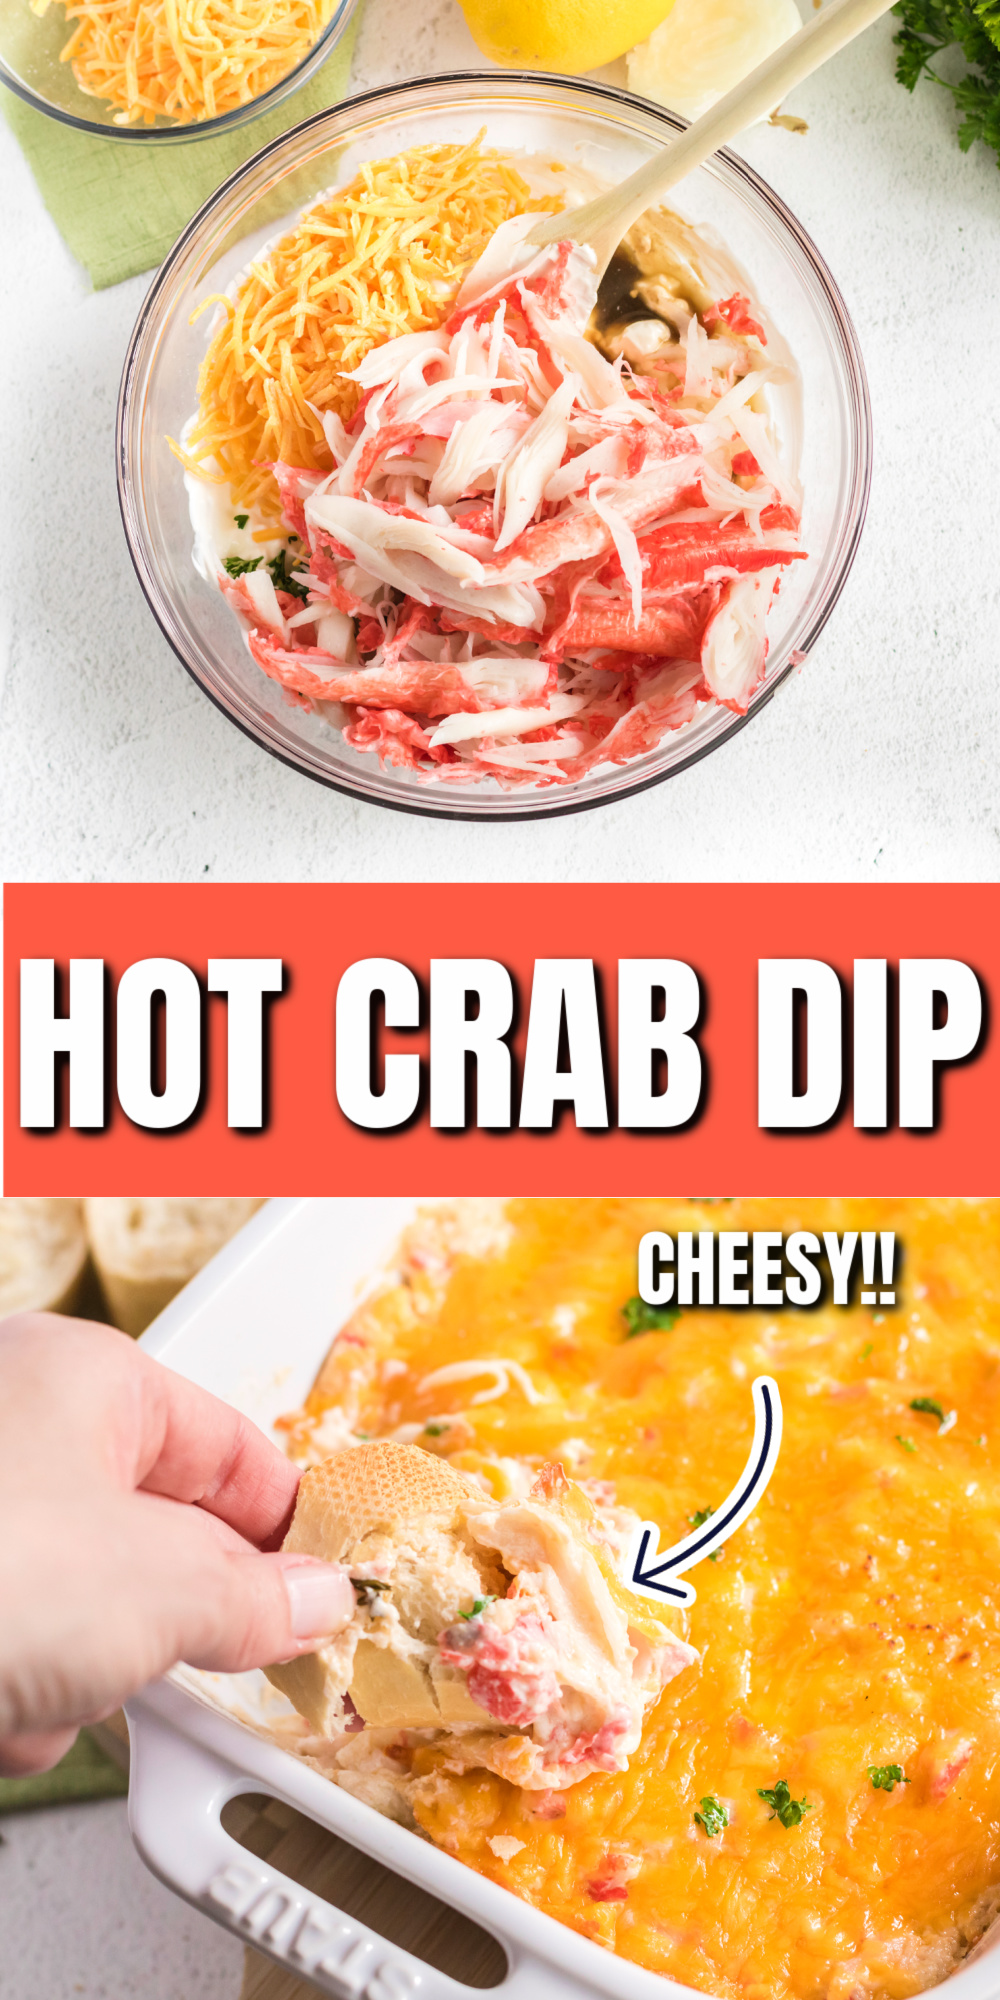 Hot Crab Dip is the perfect appetizer for a party, holiday, or just because. Made with lump crab meat, mayonnaise, onion, seasonings, and more. You will love this easy, cheesy, crab dip.